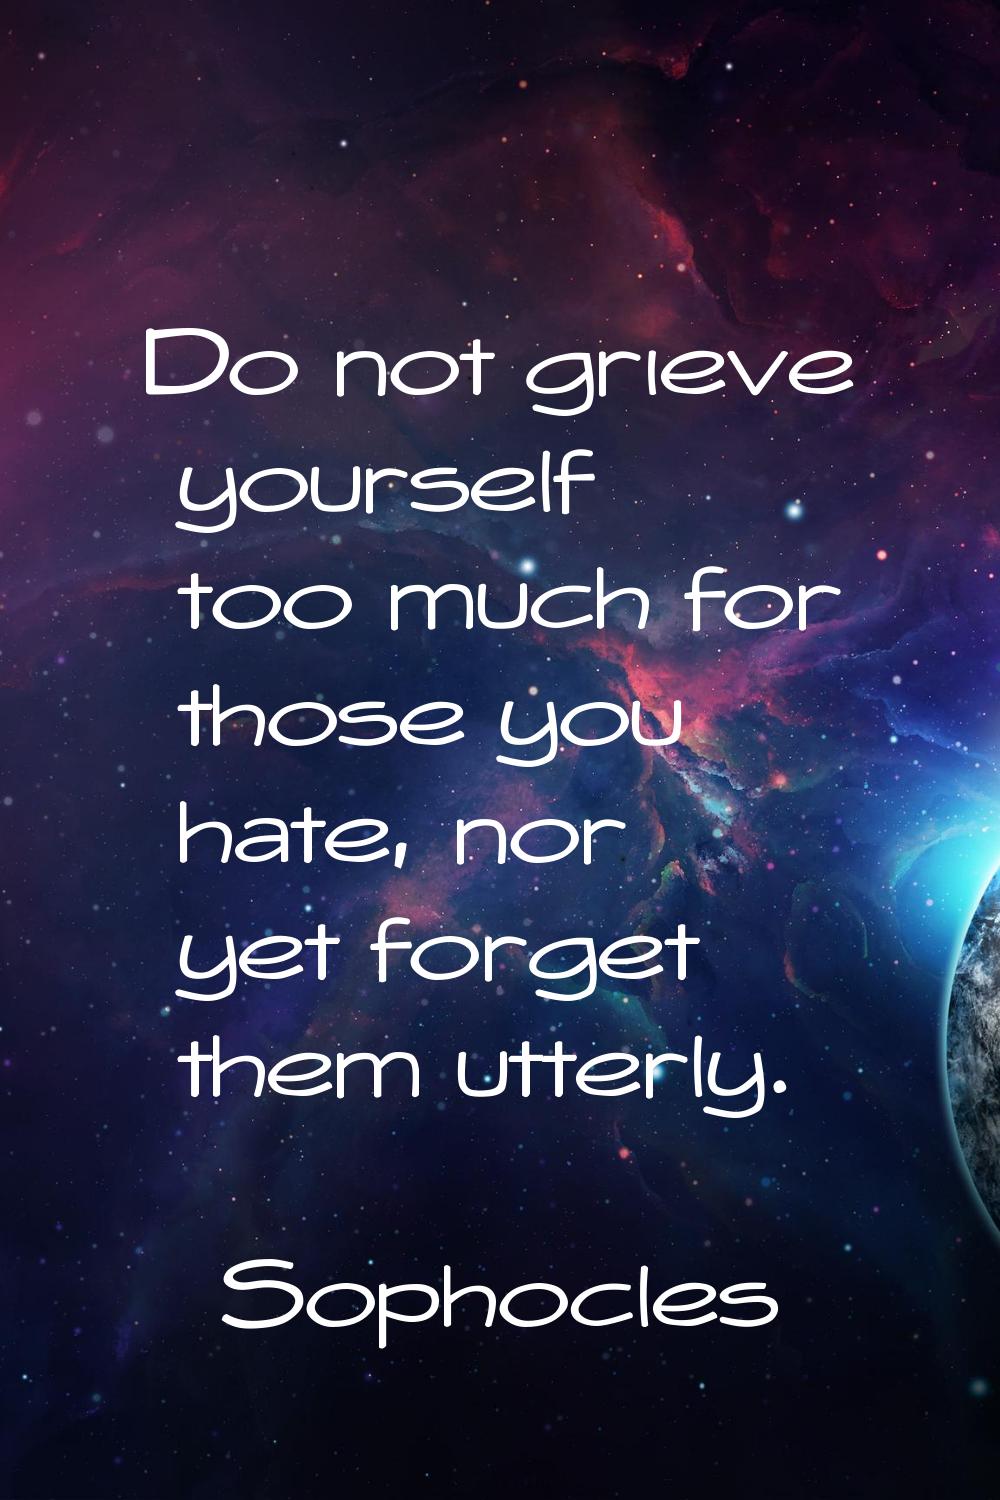 Do not grieve yourself too much for those you hate, nor yet forget them utterly.